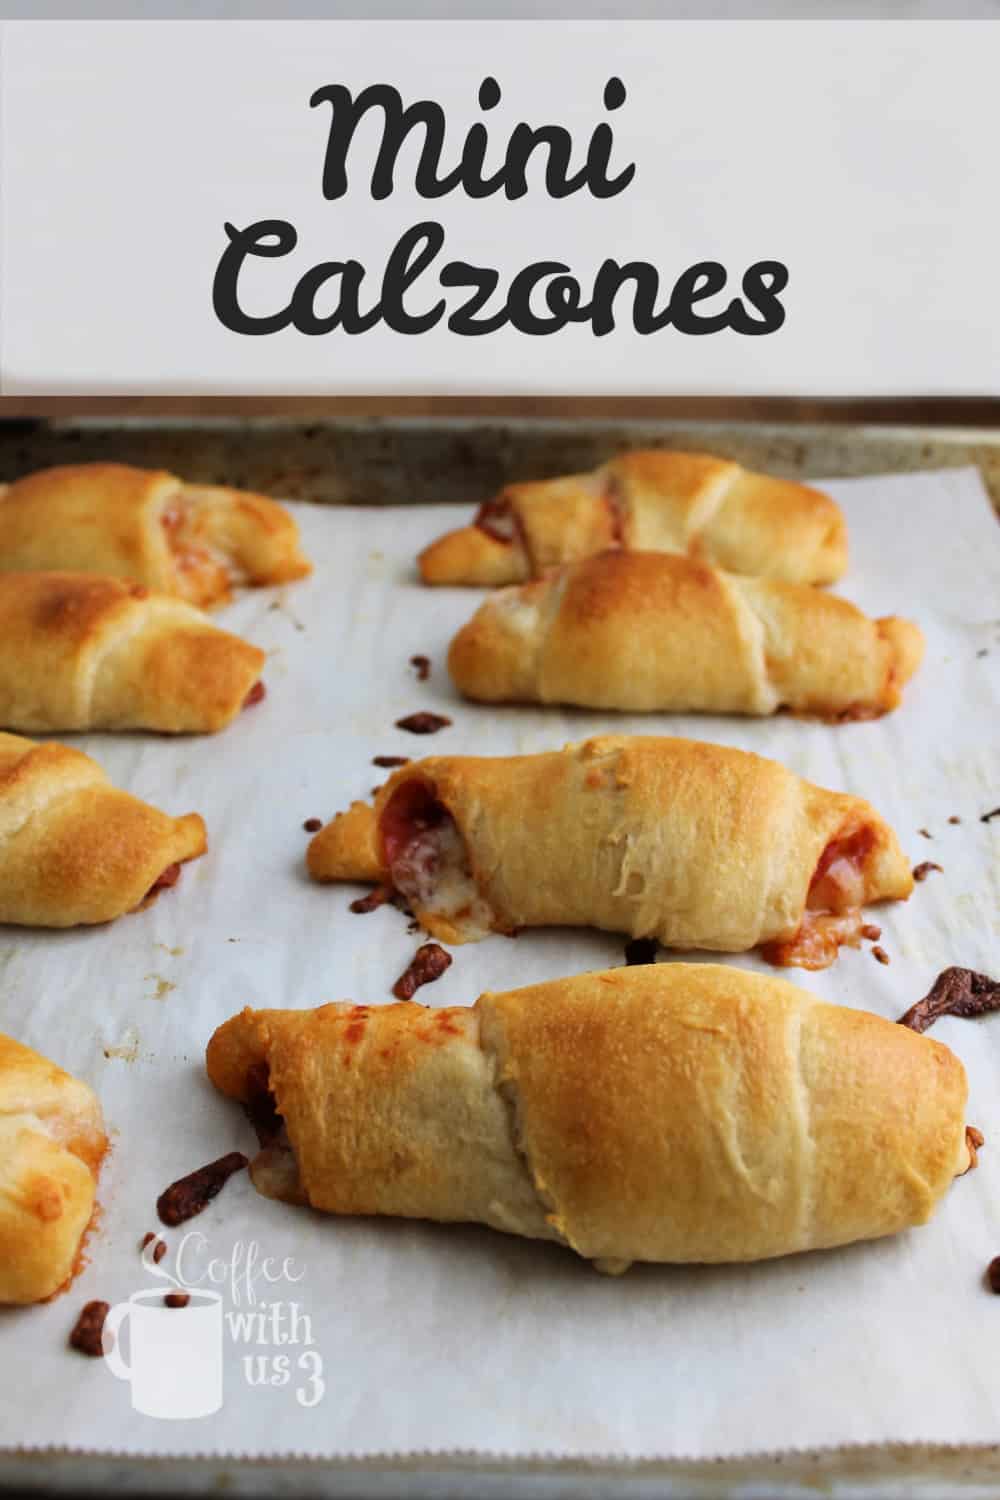 How to Make Calzones With Crescent Rolls